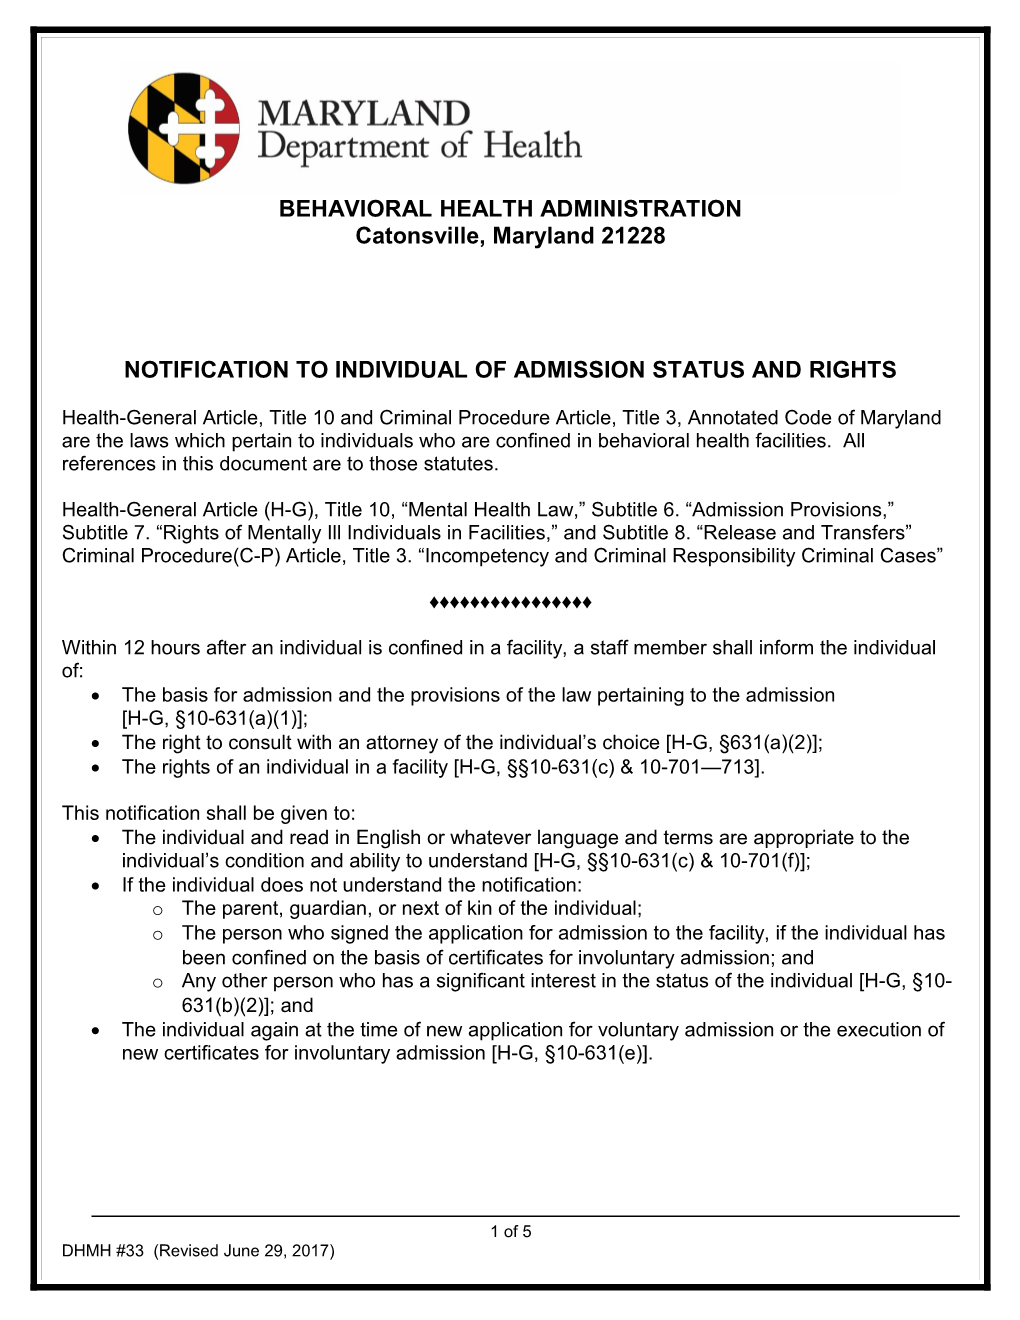 Notification to Individual of Admission Status and Rights